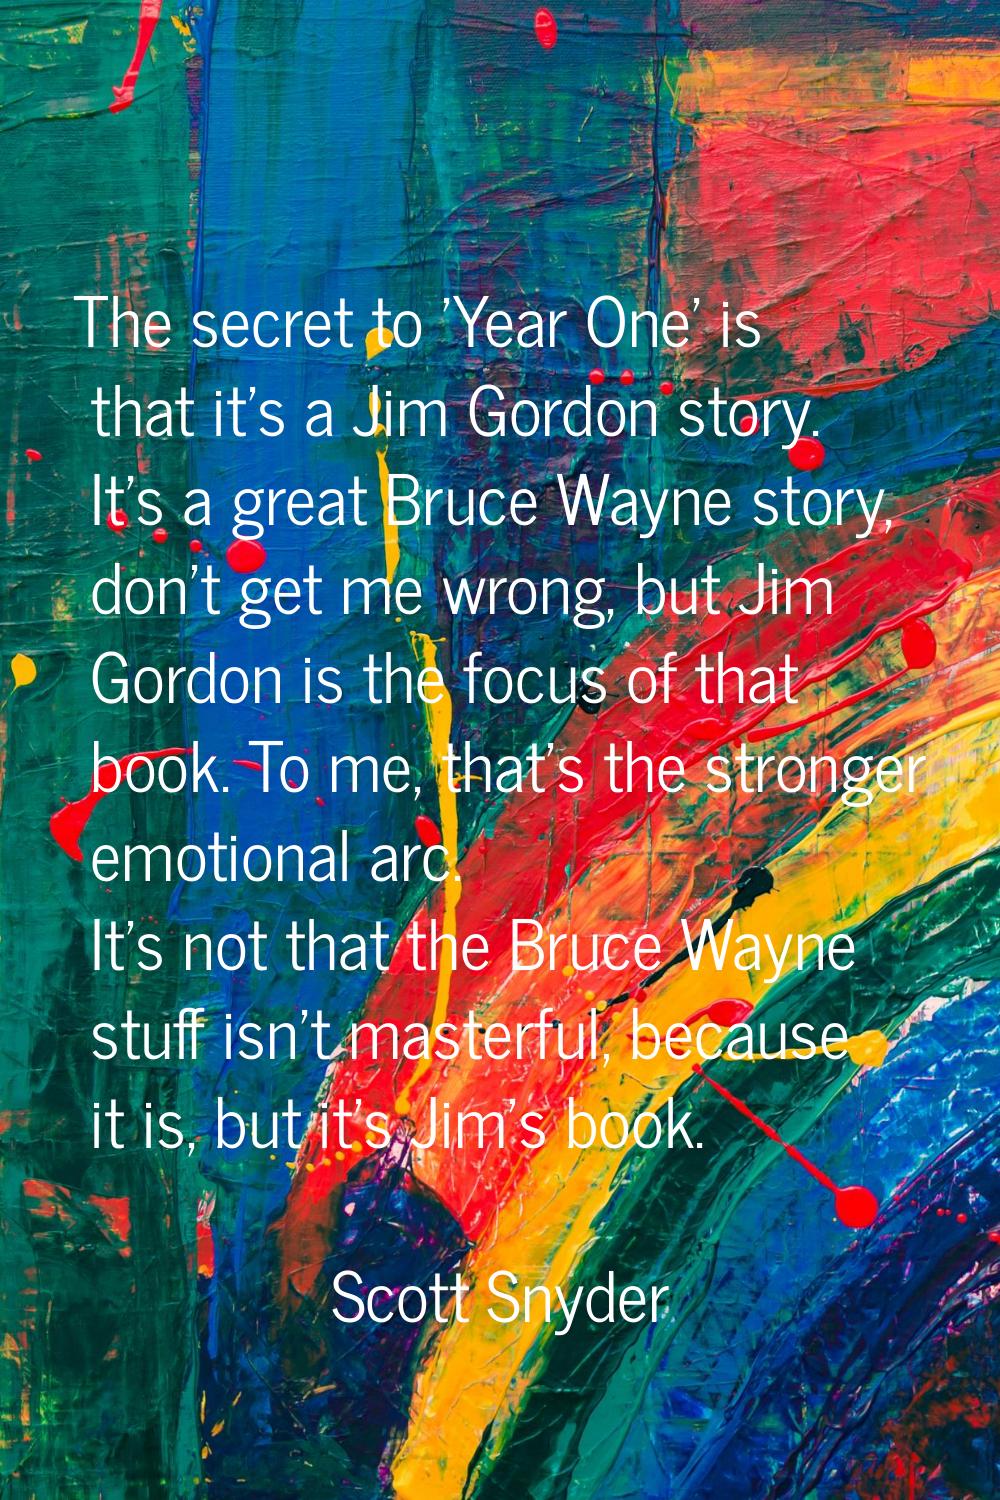 The secret to 'Year One' is that it's a Jim Gordon story. It's a great Bruce Wayne story, don't get